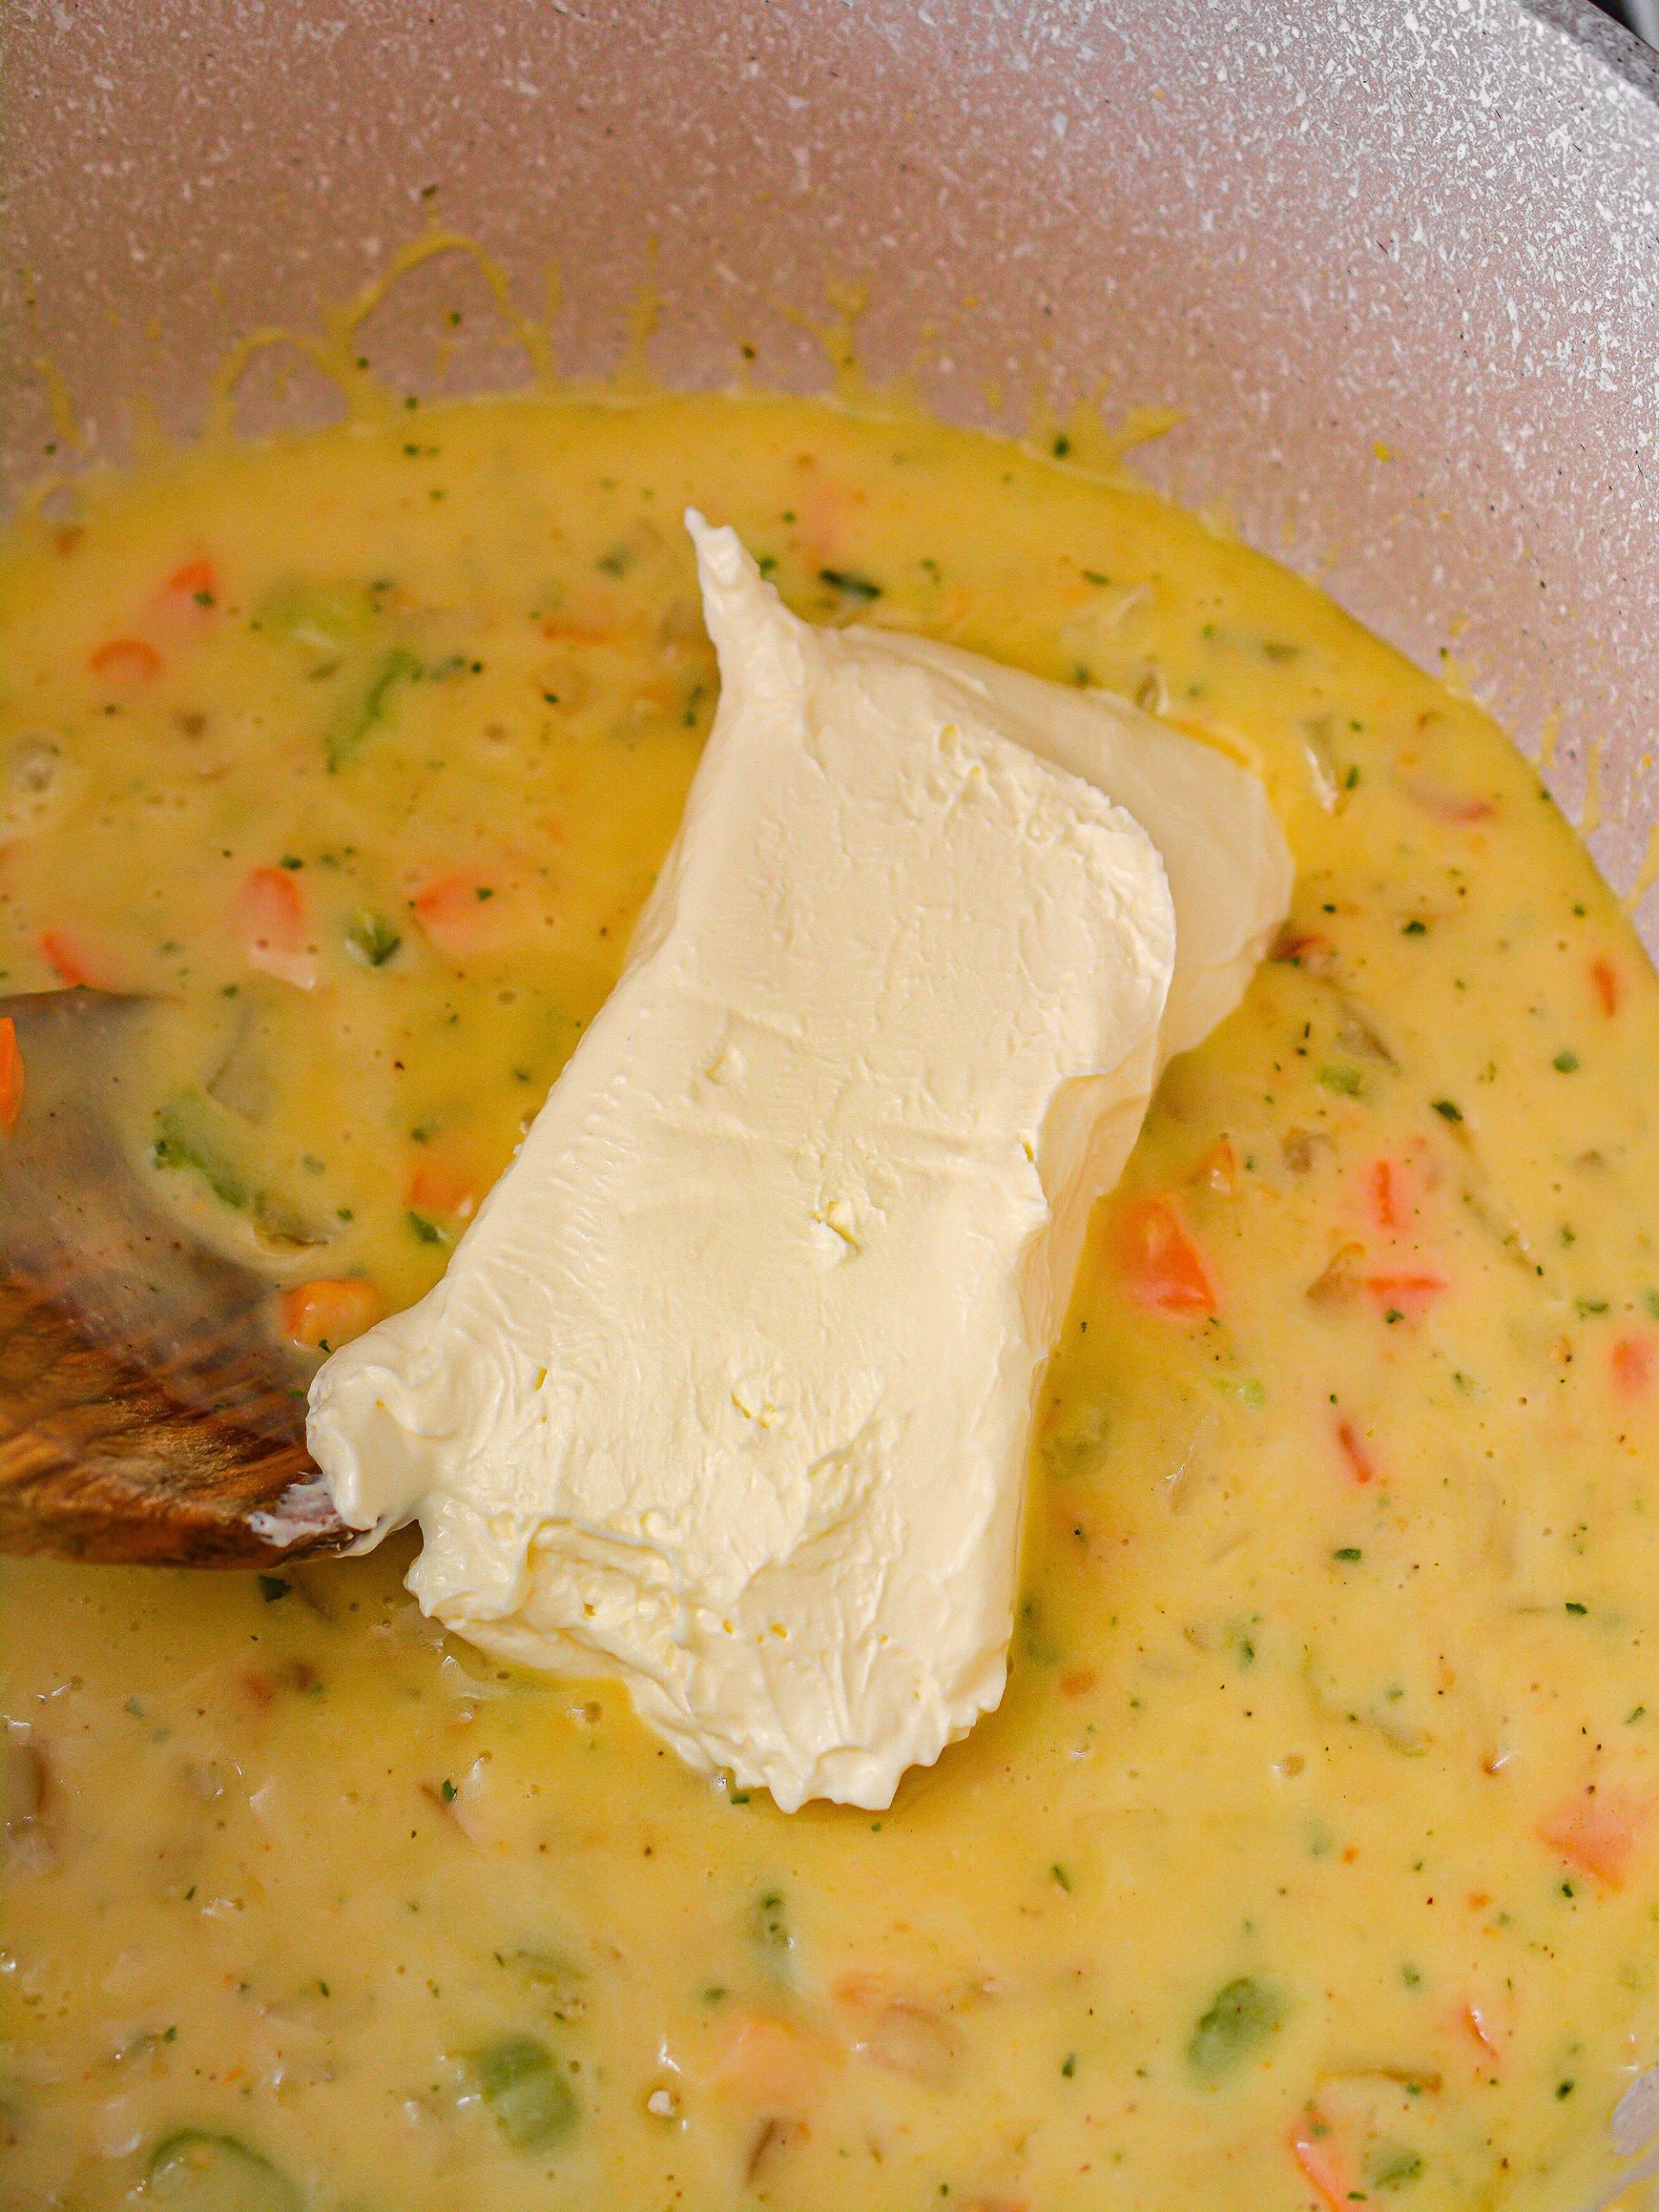 Add the cream cheese to the pot and stir until the cheese is completely melted.